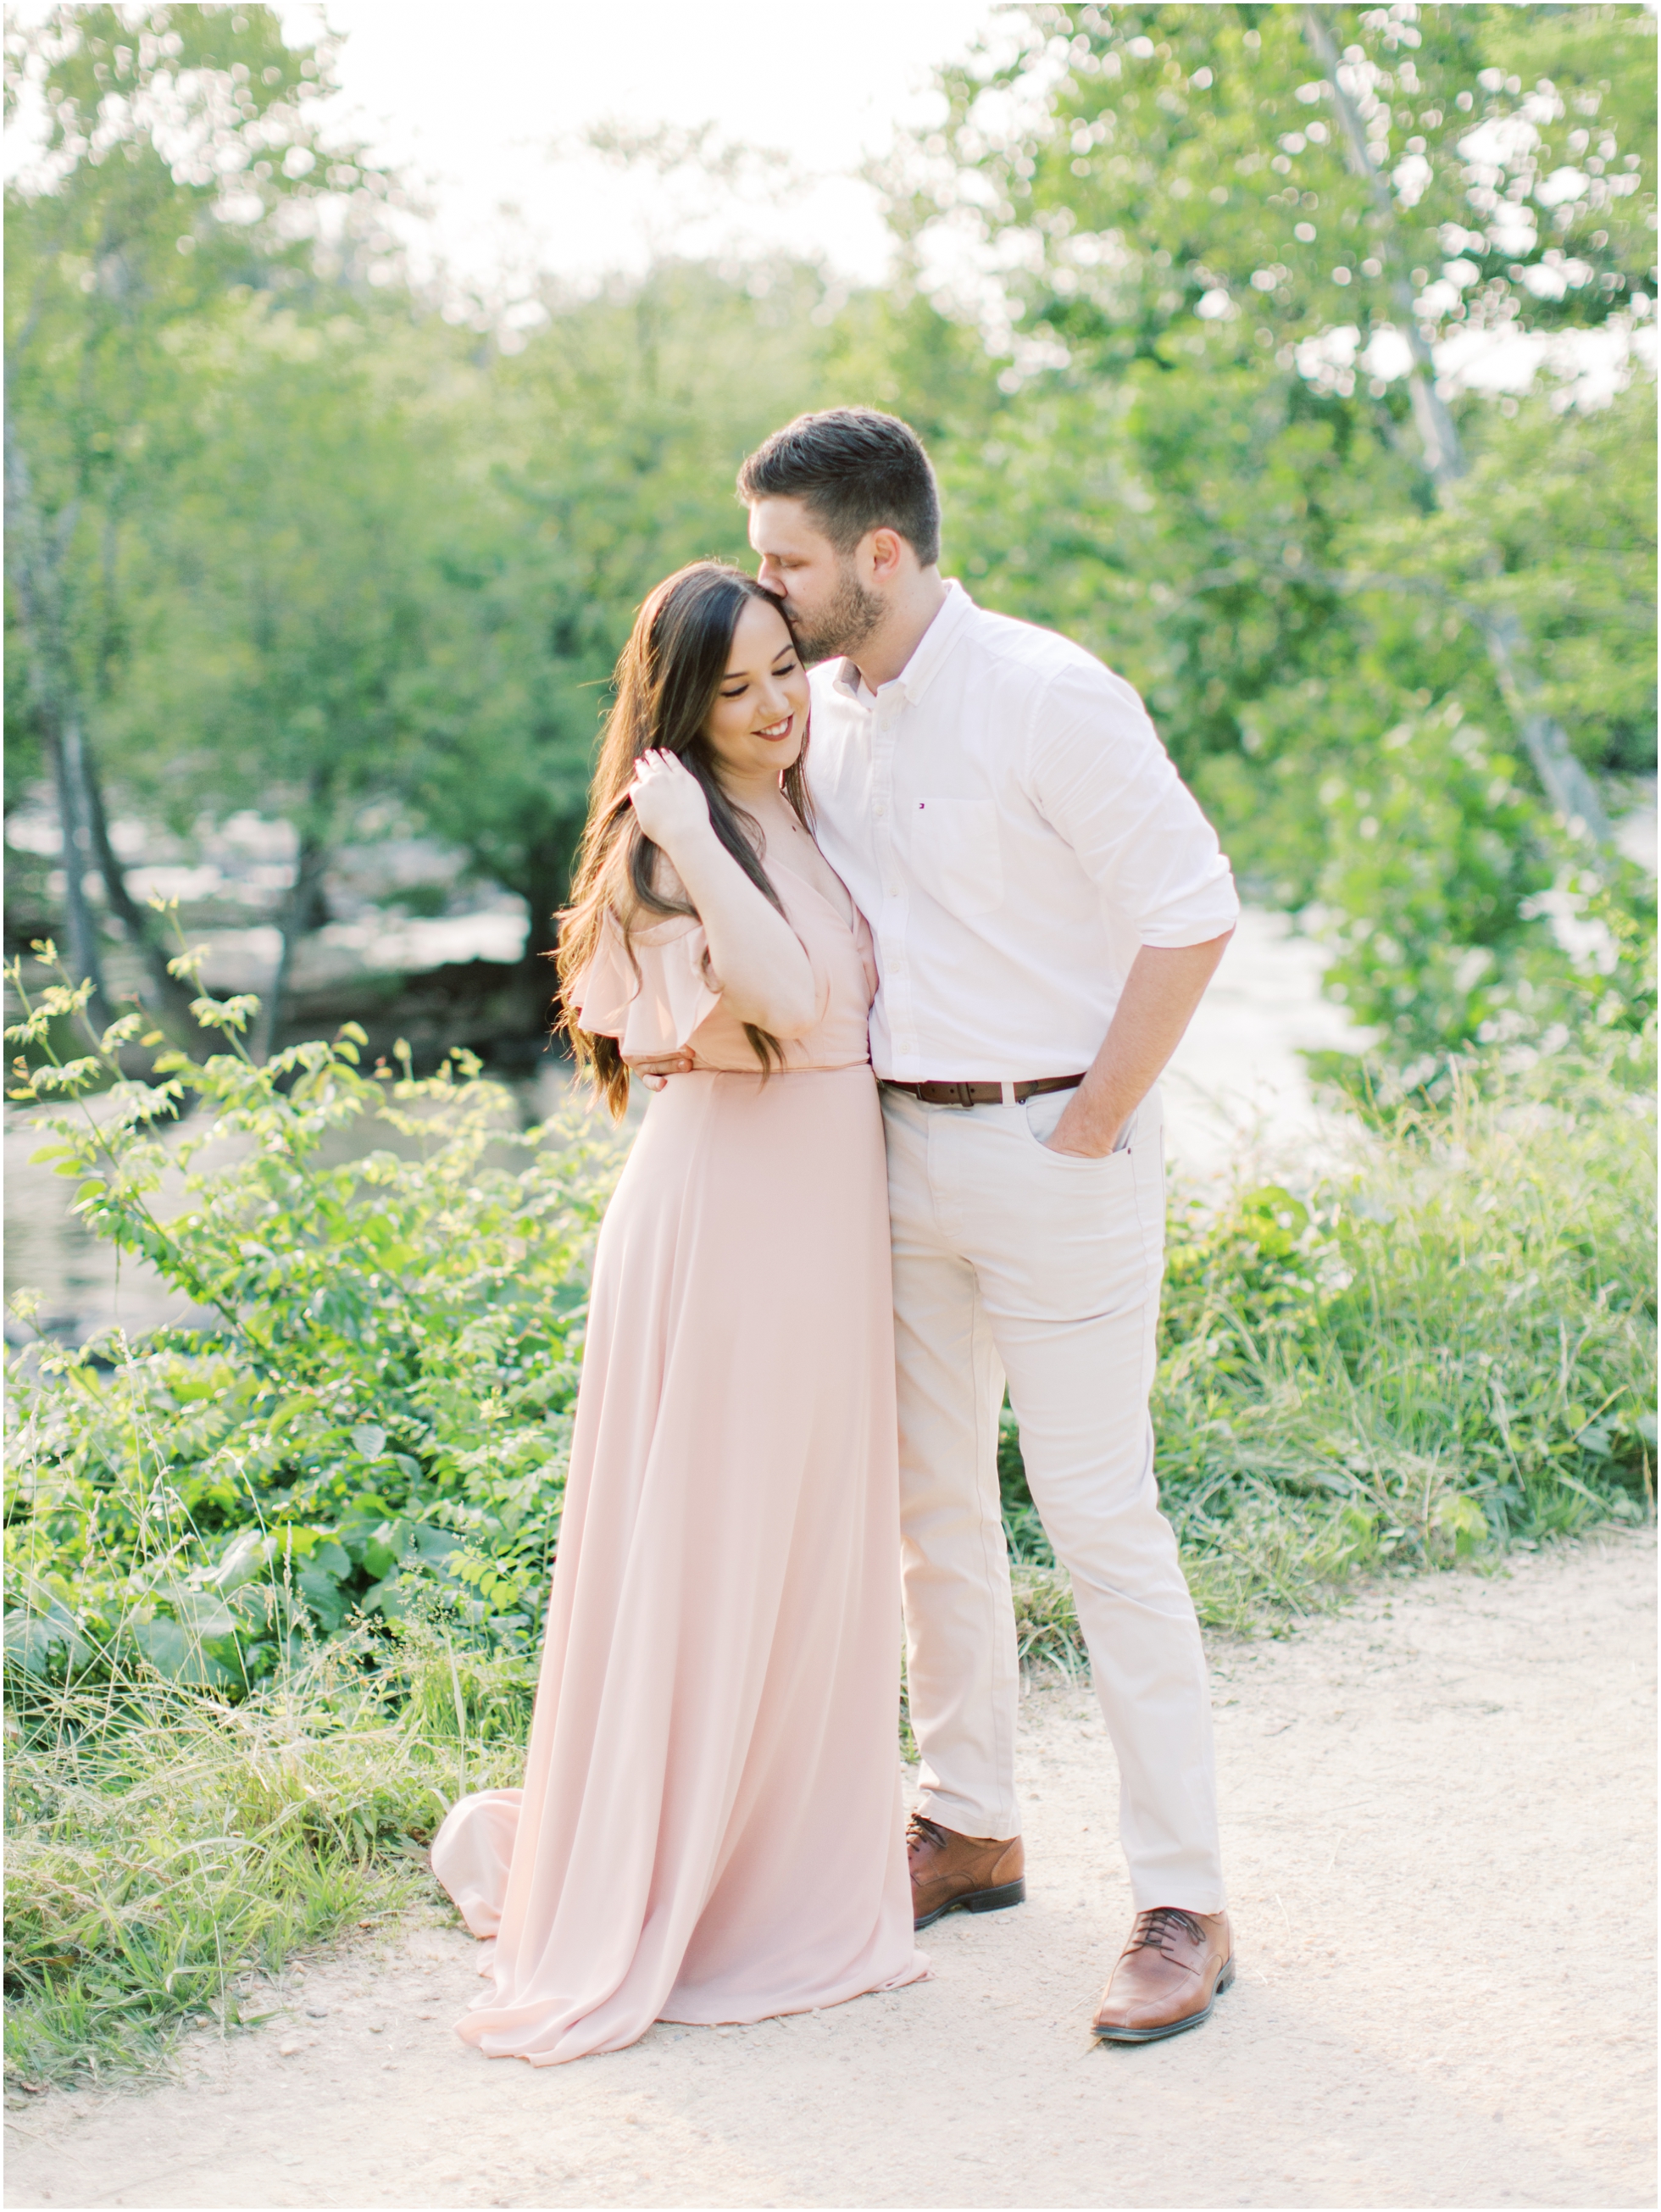 A Lush, Nature-filled Engagement Session at the Billy Goat Trail in Great Falls, MD 